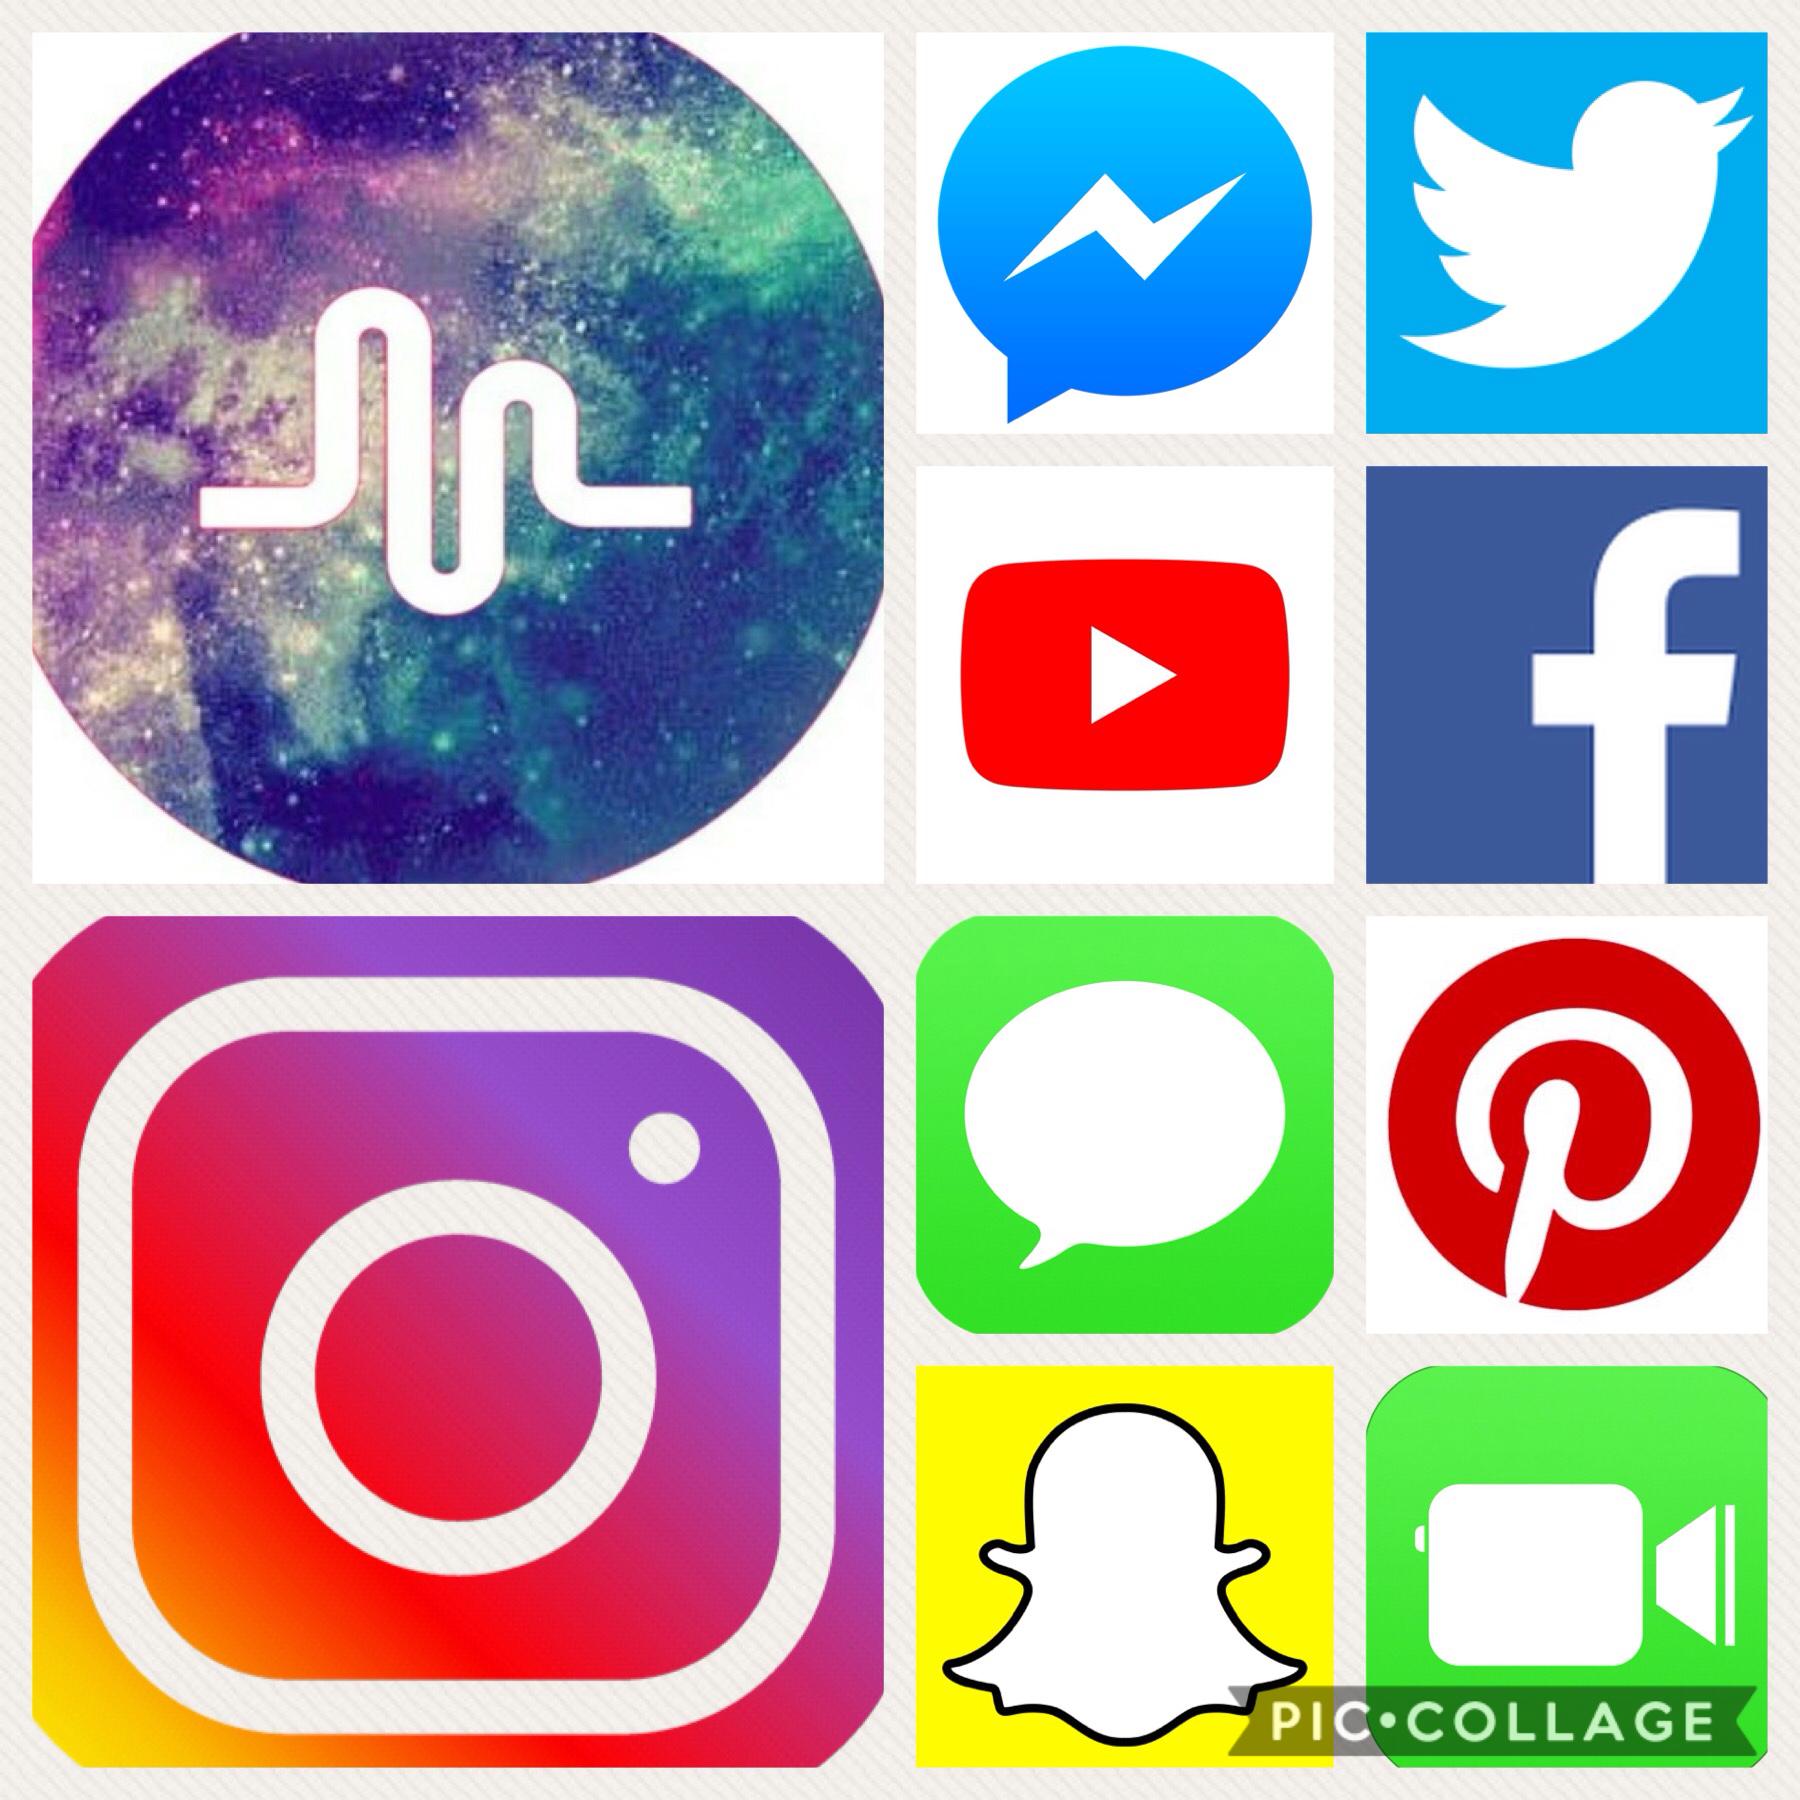 TAP

Out of all these apps which app do you get the most notifications on daily! 
Reply in the comments and the first 5 people will get a shoutout!!!!❤️